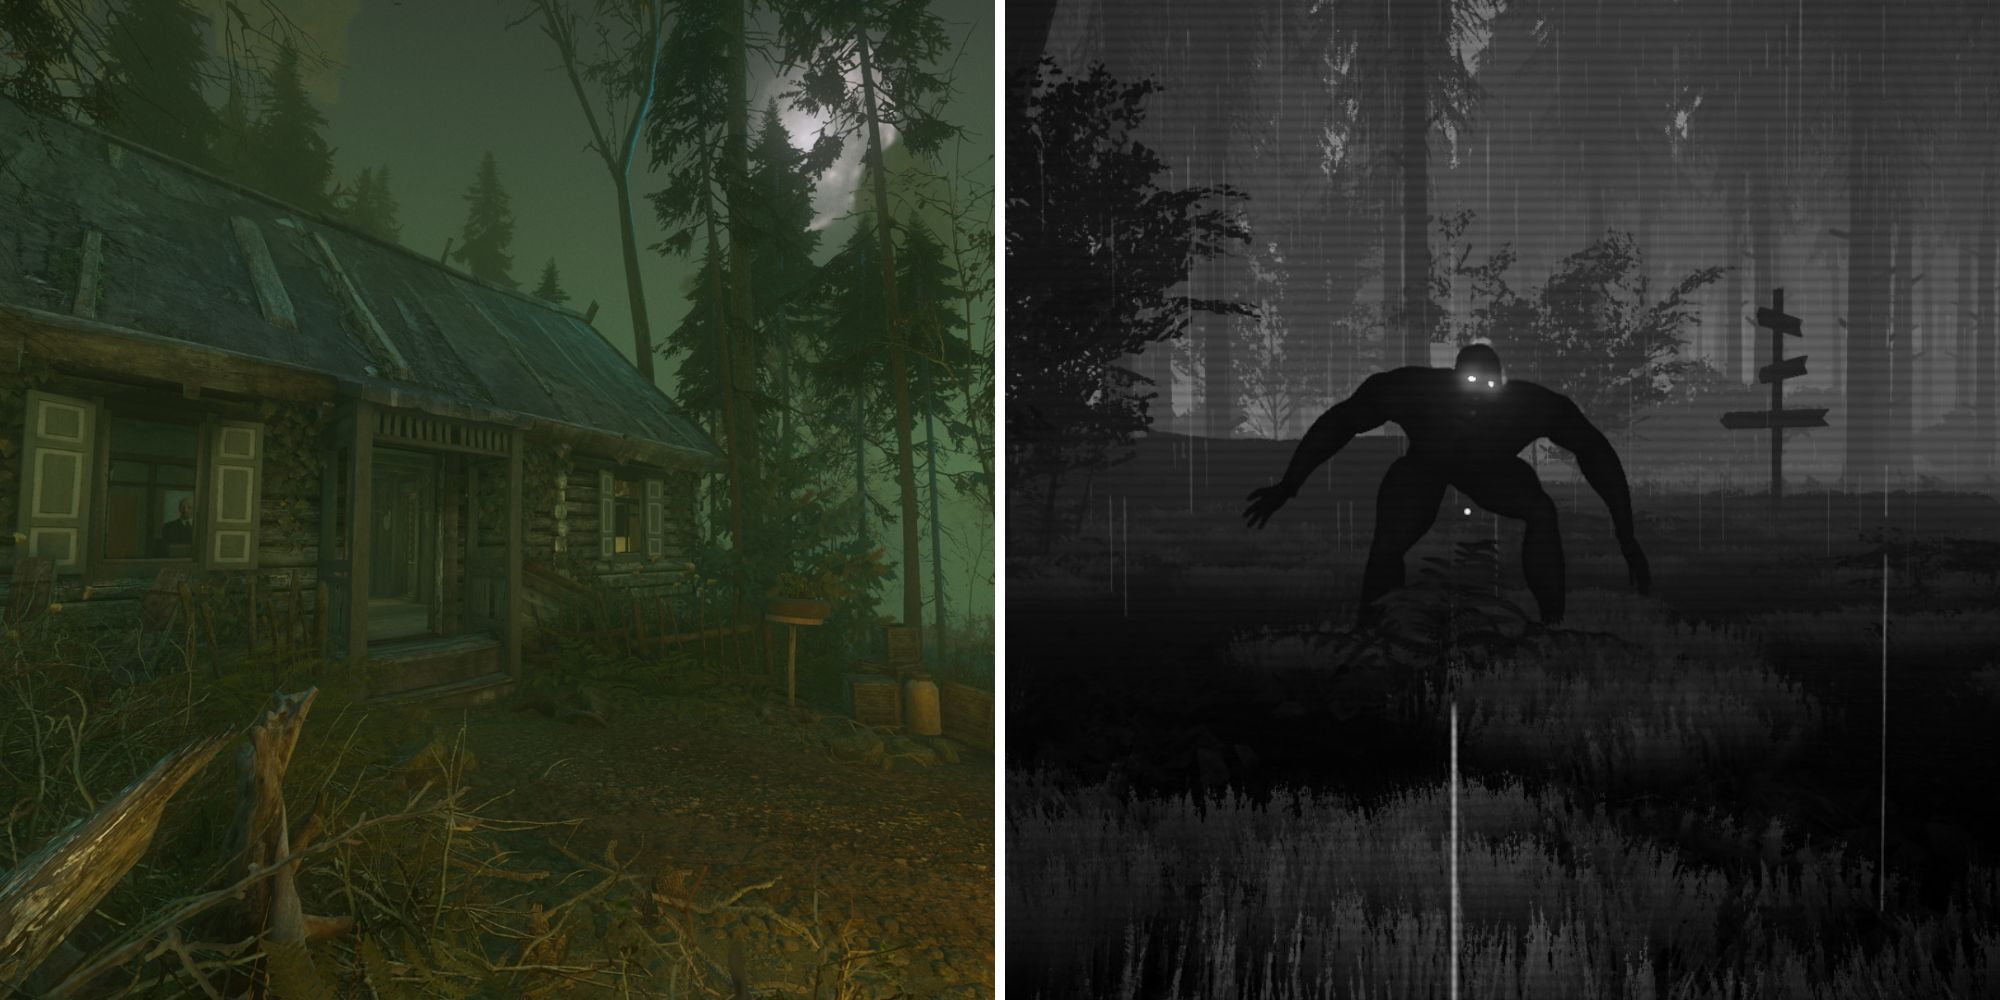 A split image of bright moonlight and a green haze enveloping a solitary log cabin in the woods, and a black and white picture of a large, muscular humanoid with glowing eyes.